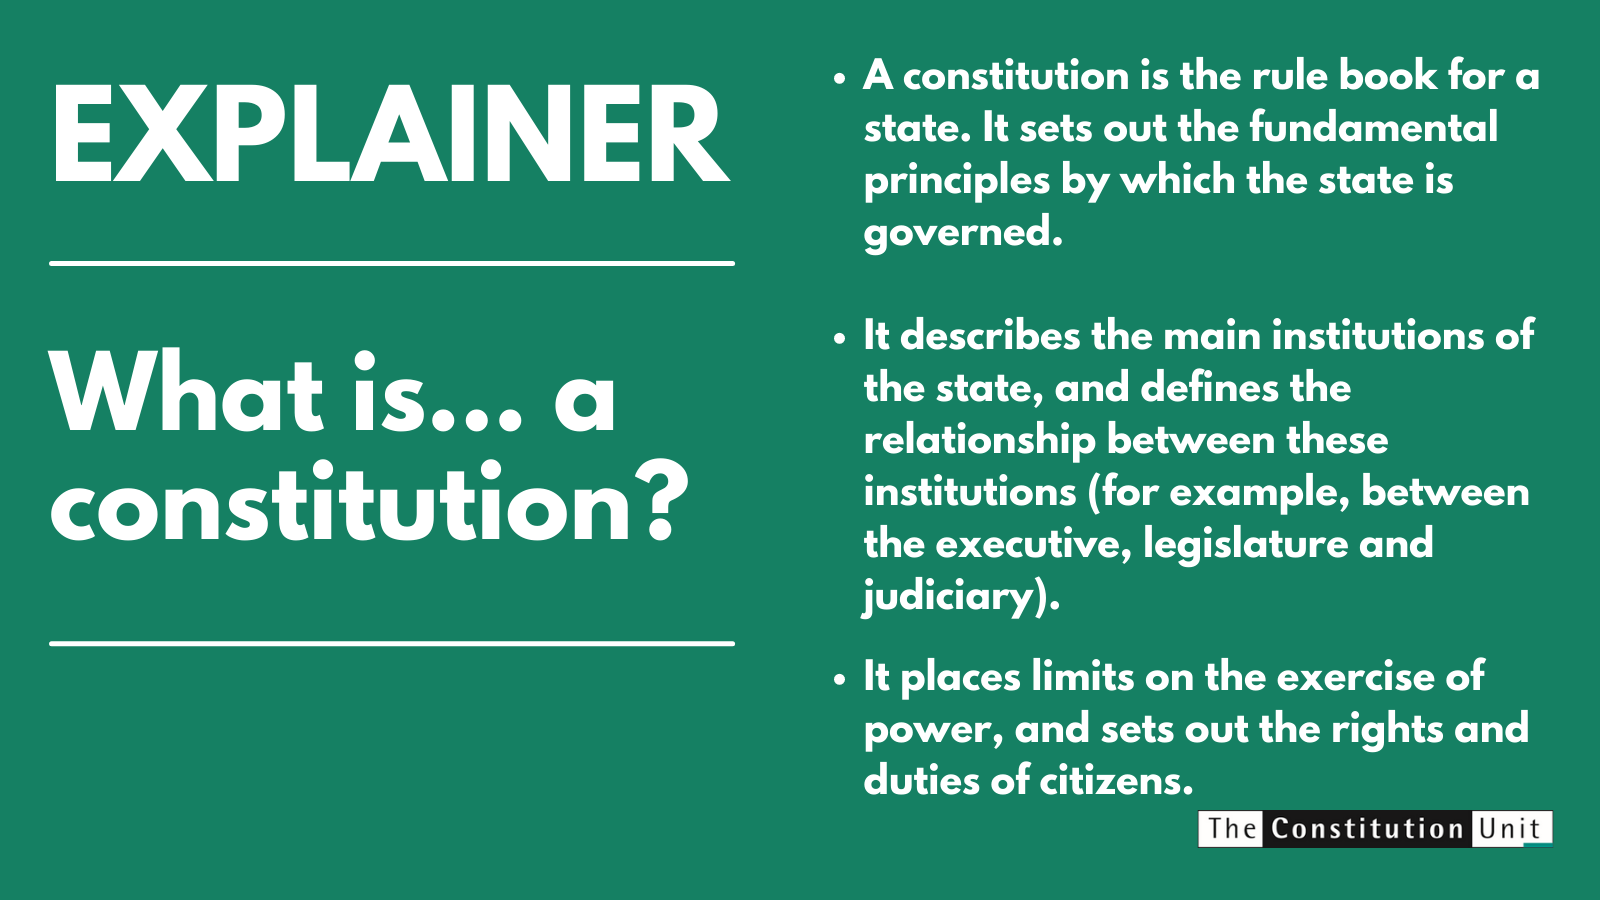 Explainer: What is a Constitution?